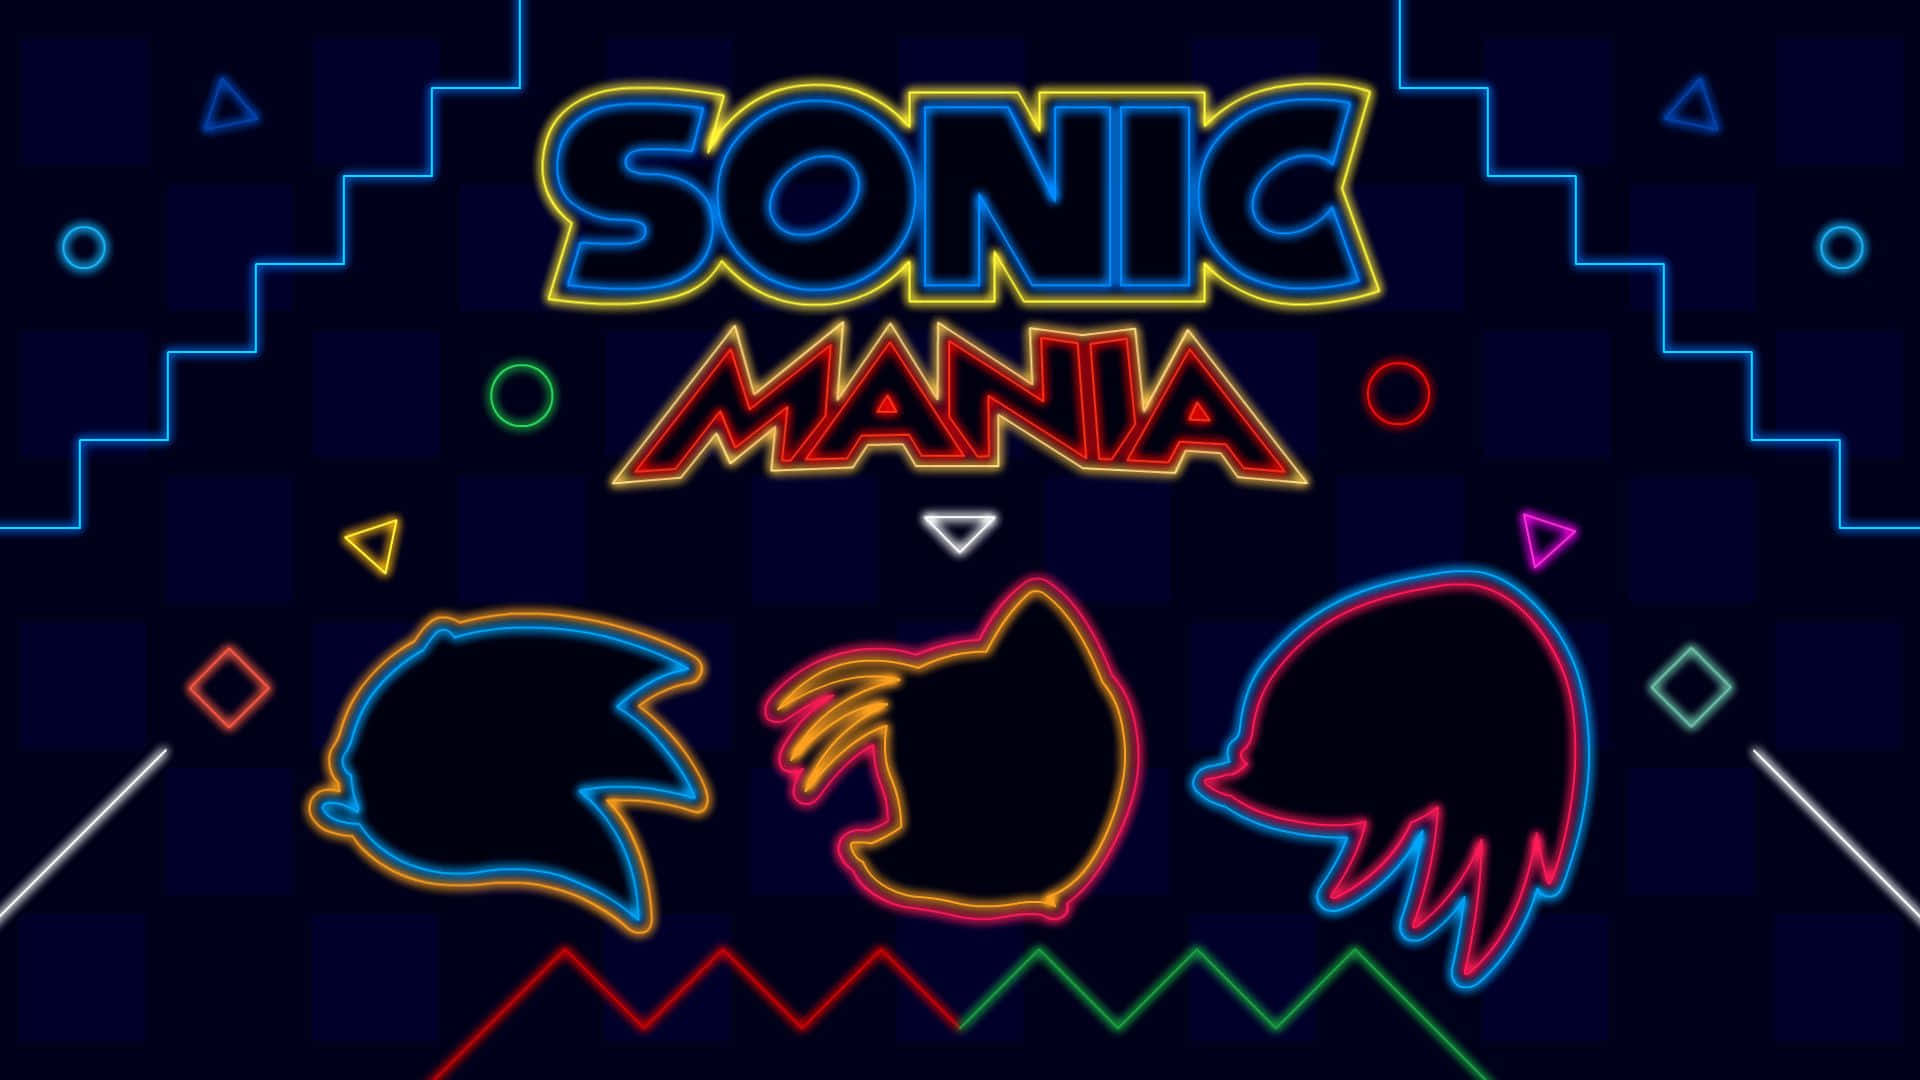 Cool Ps4 Sonic Mania With Neon Colored Design